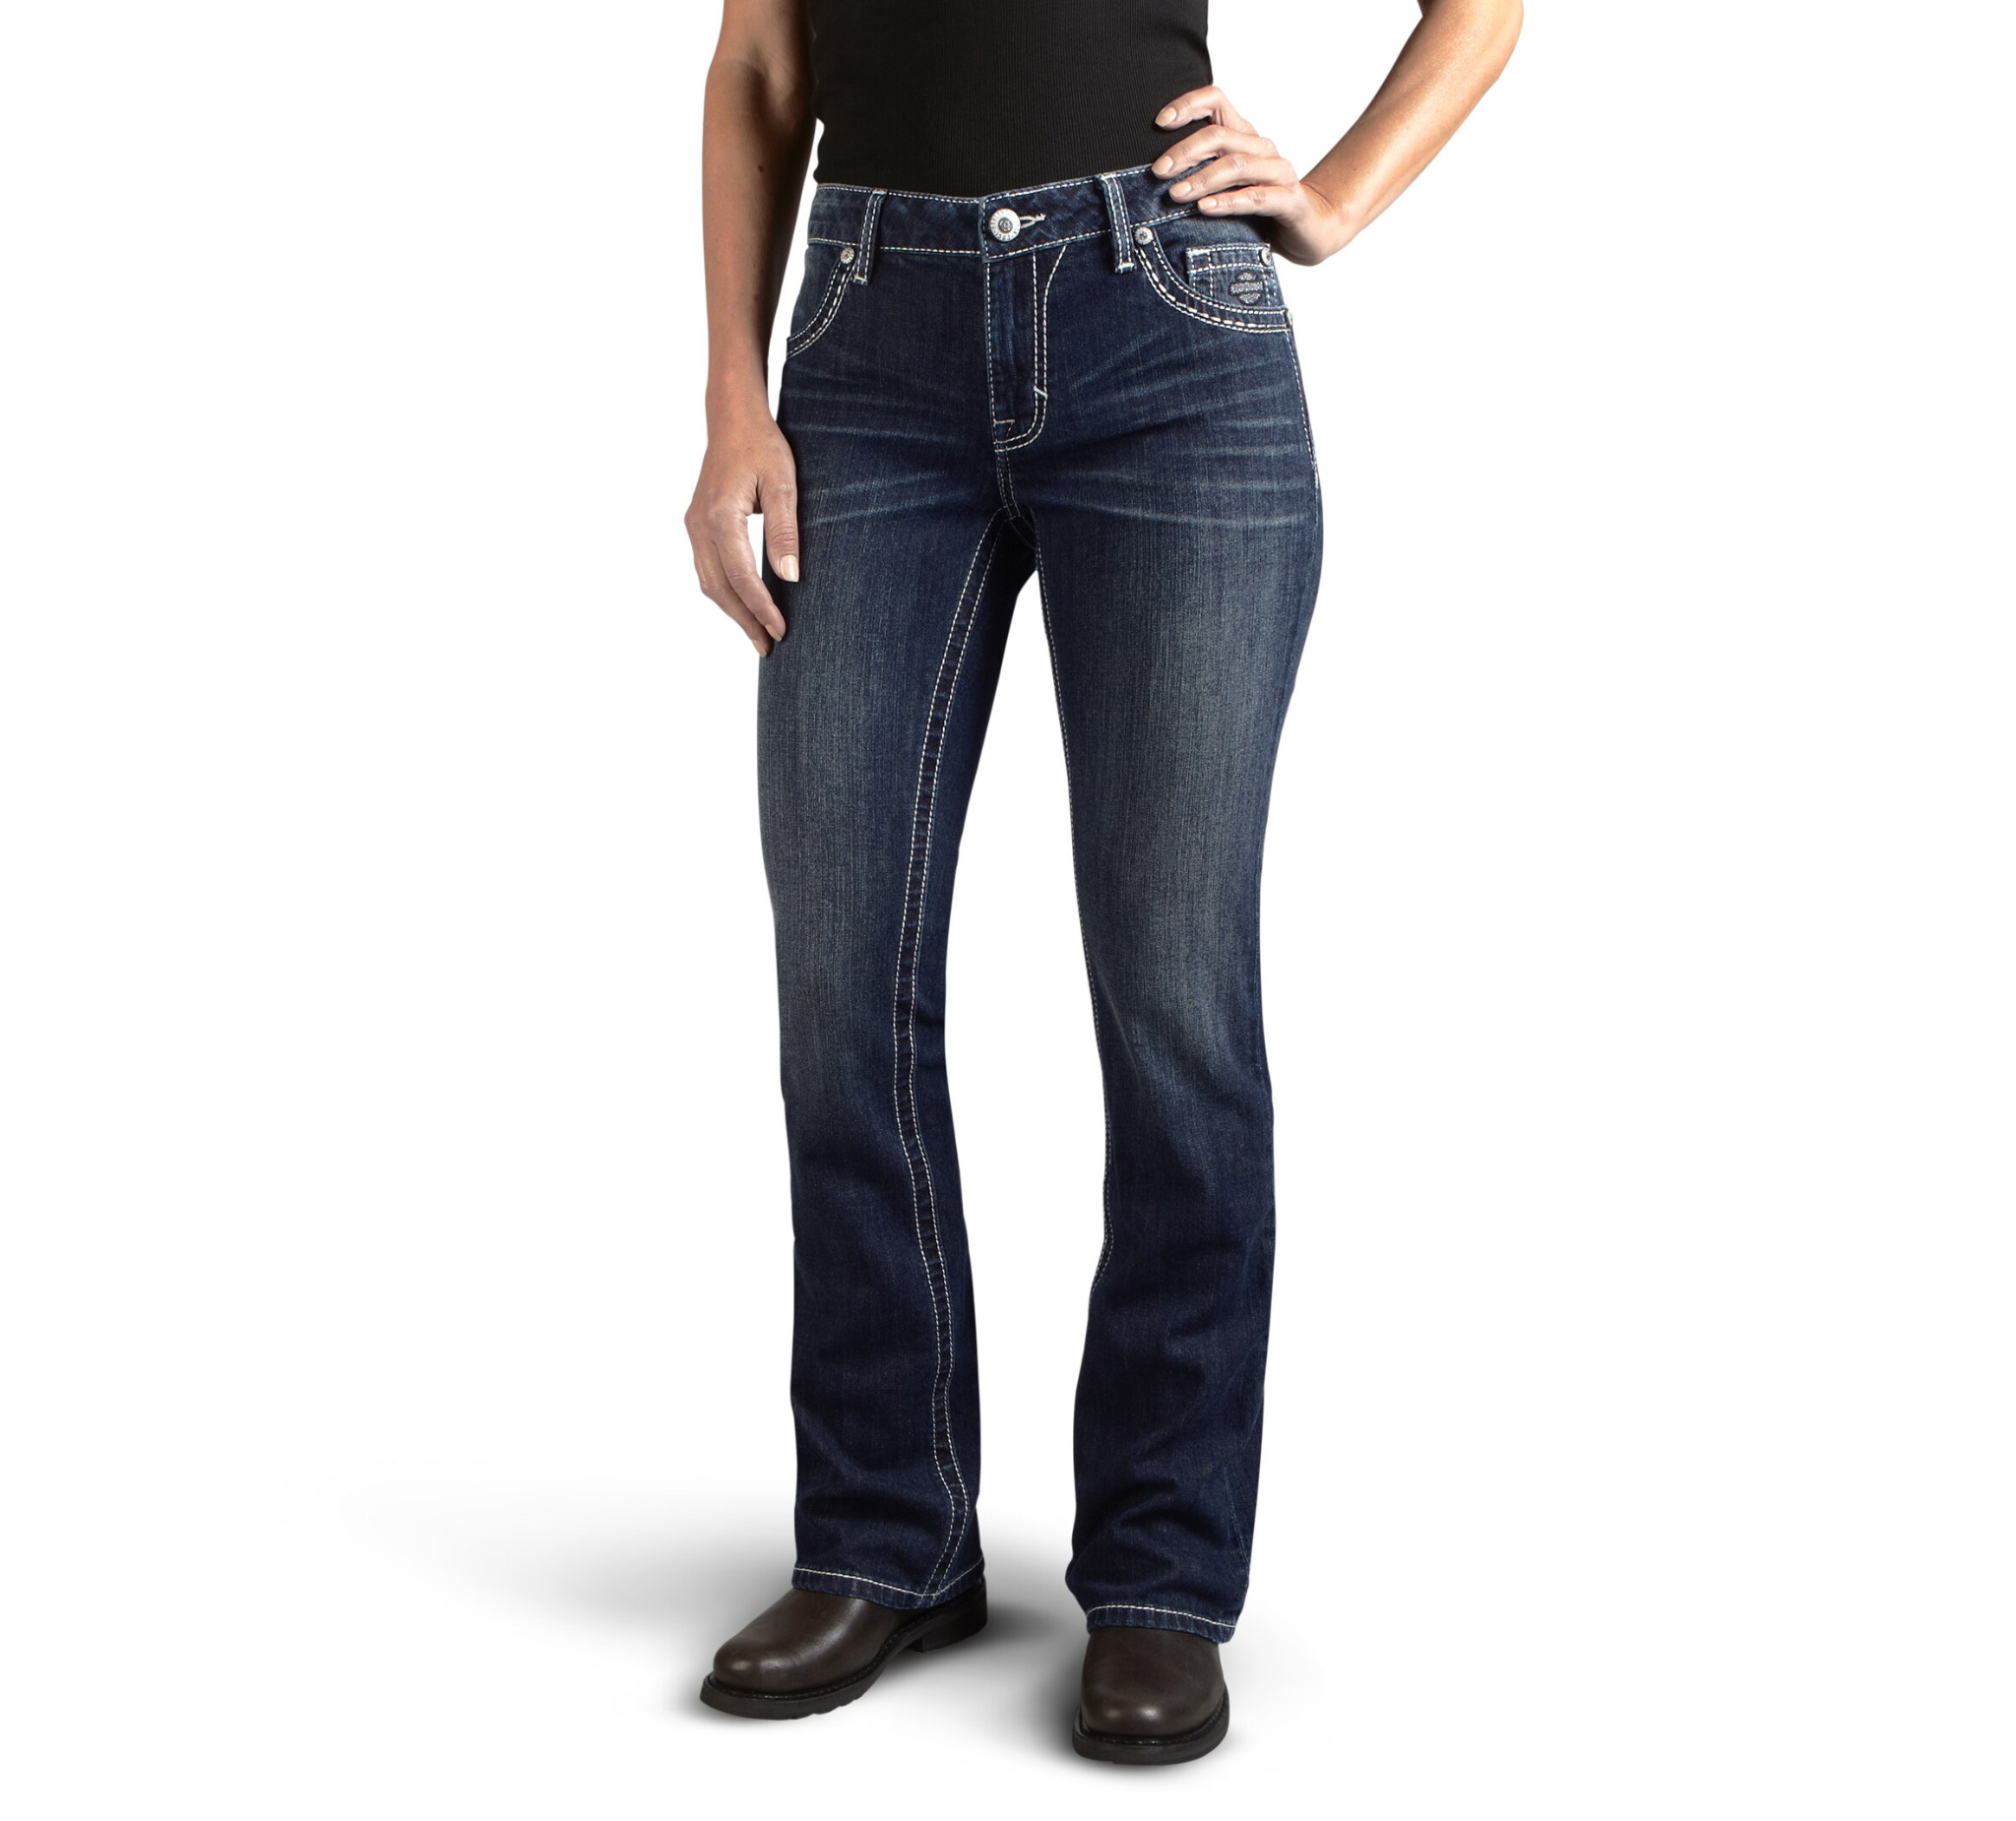 Women's Curvy Boot Cut Embellished Logo Mid-Rise Jeans | Harley ...